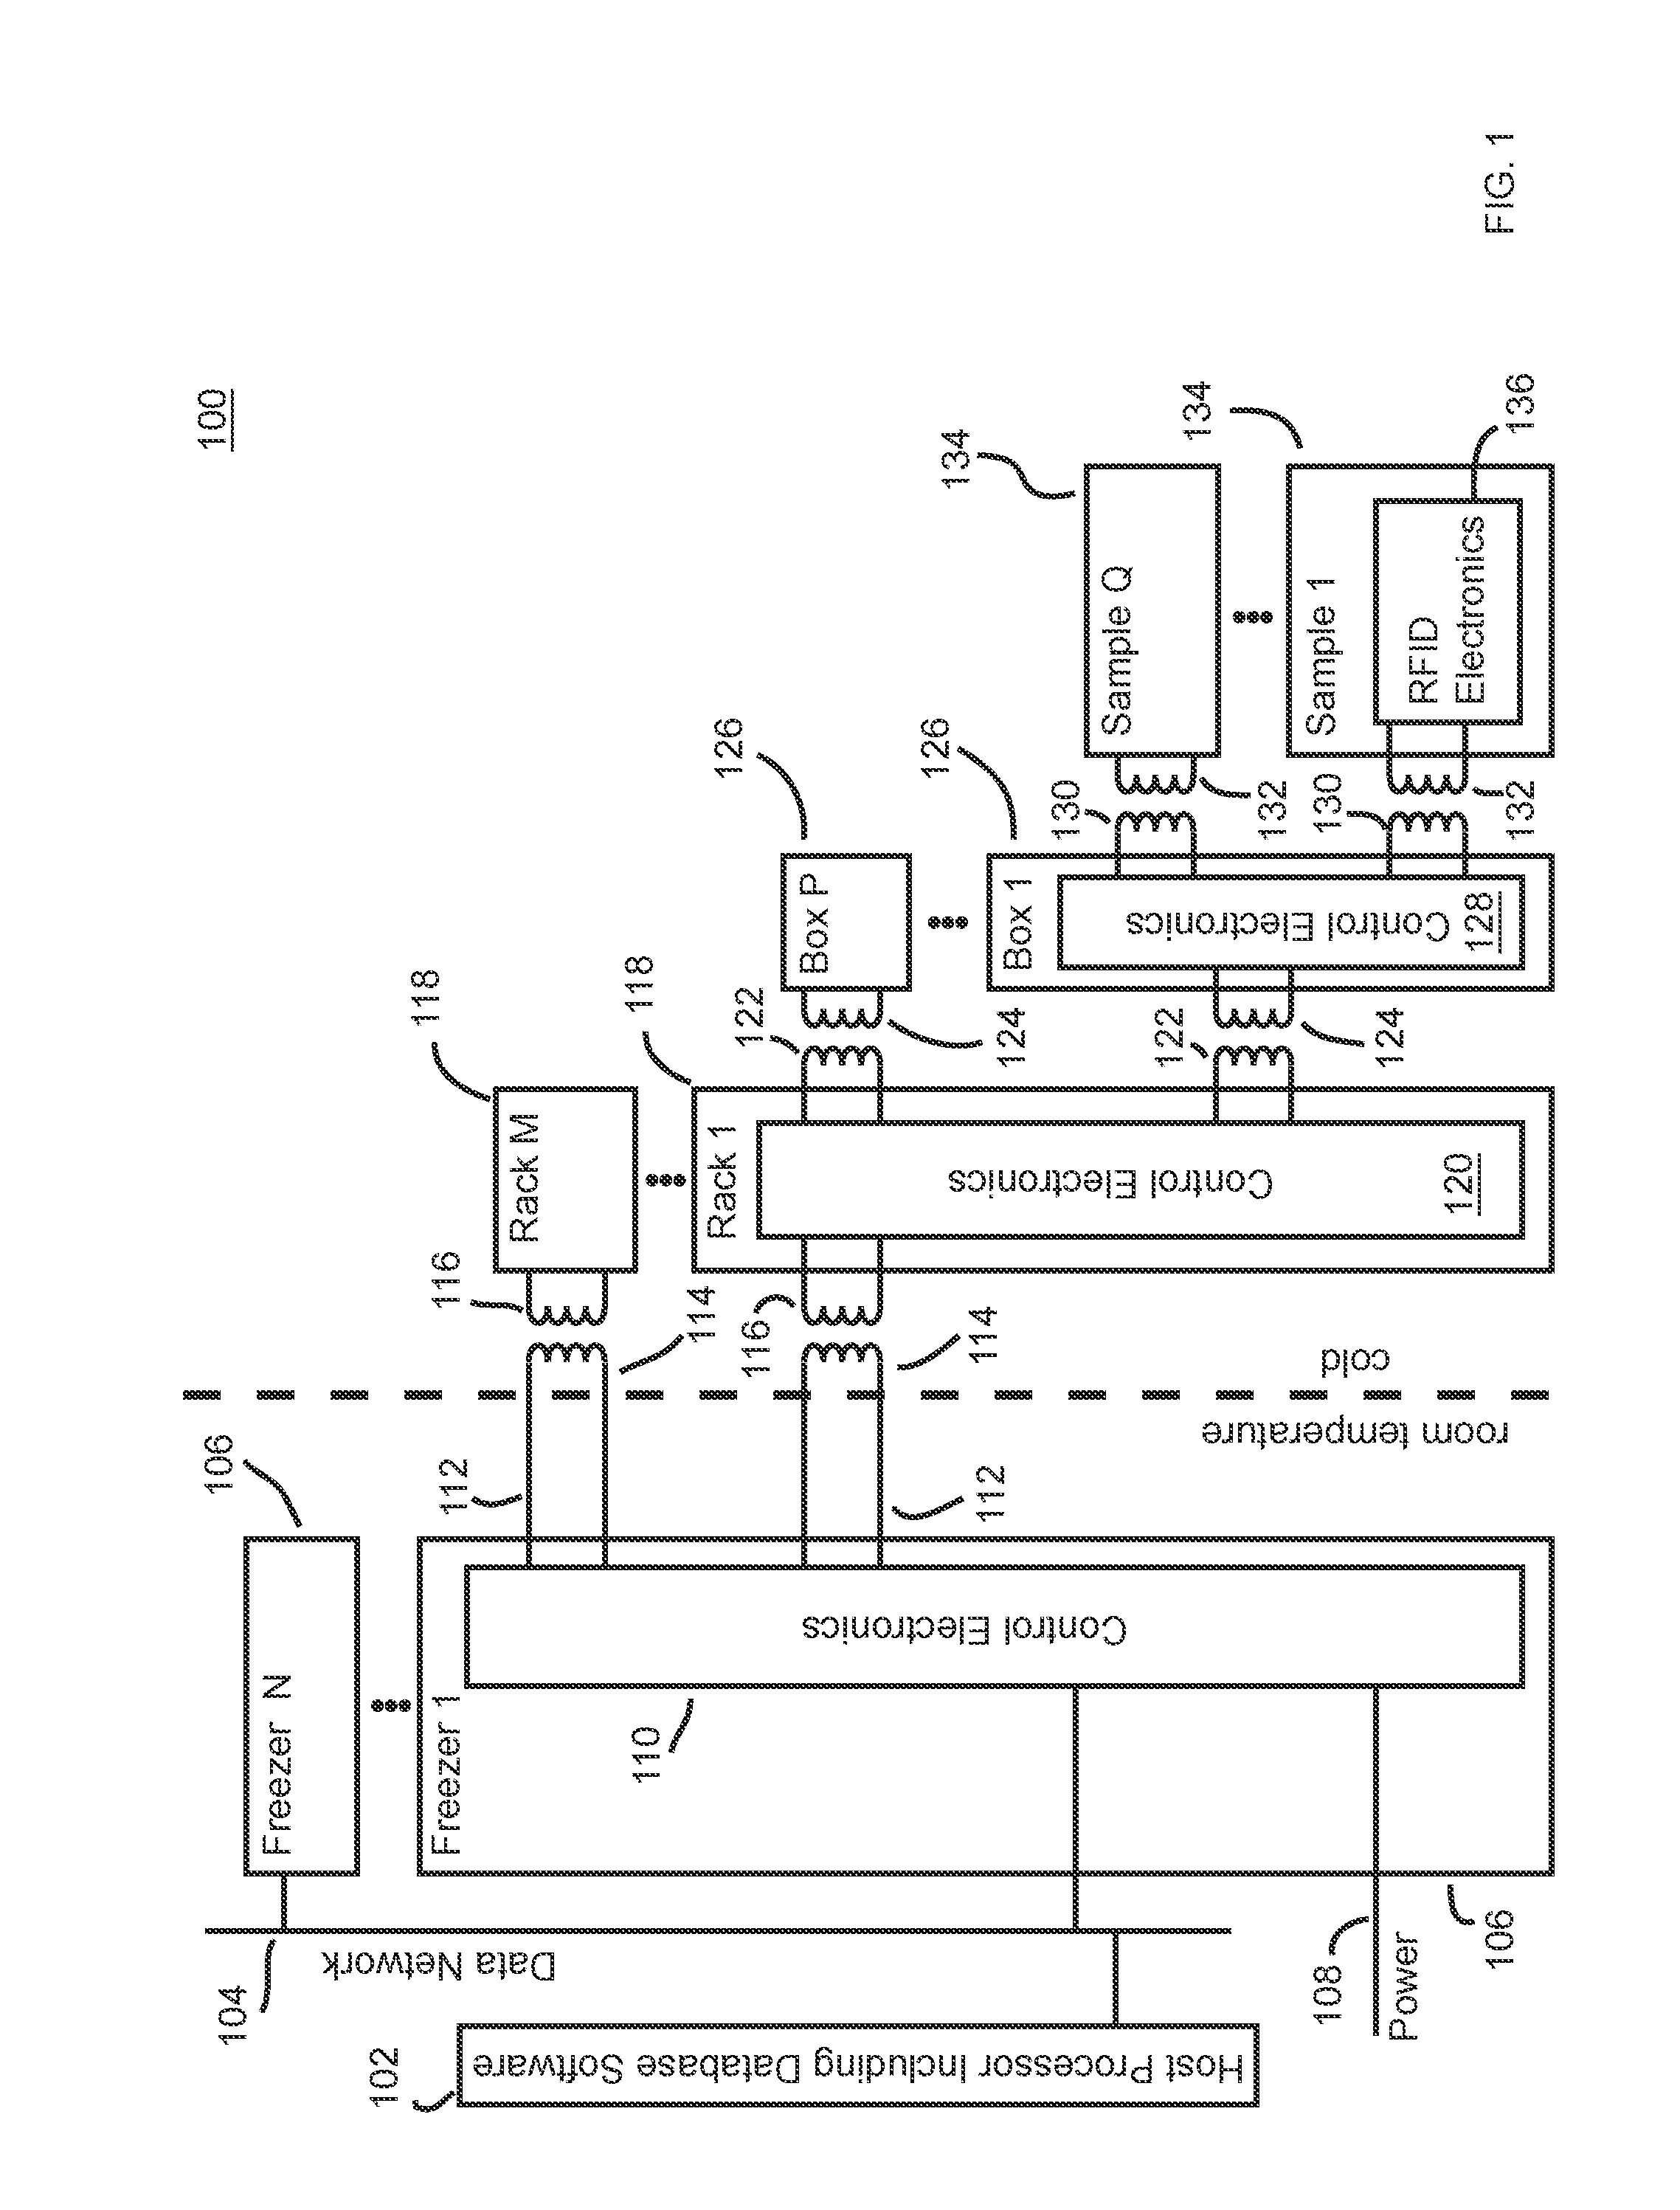 Hierarchical Sample Storage System